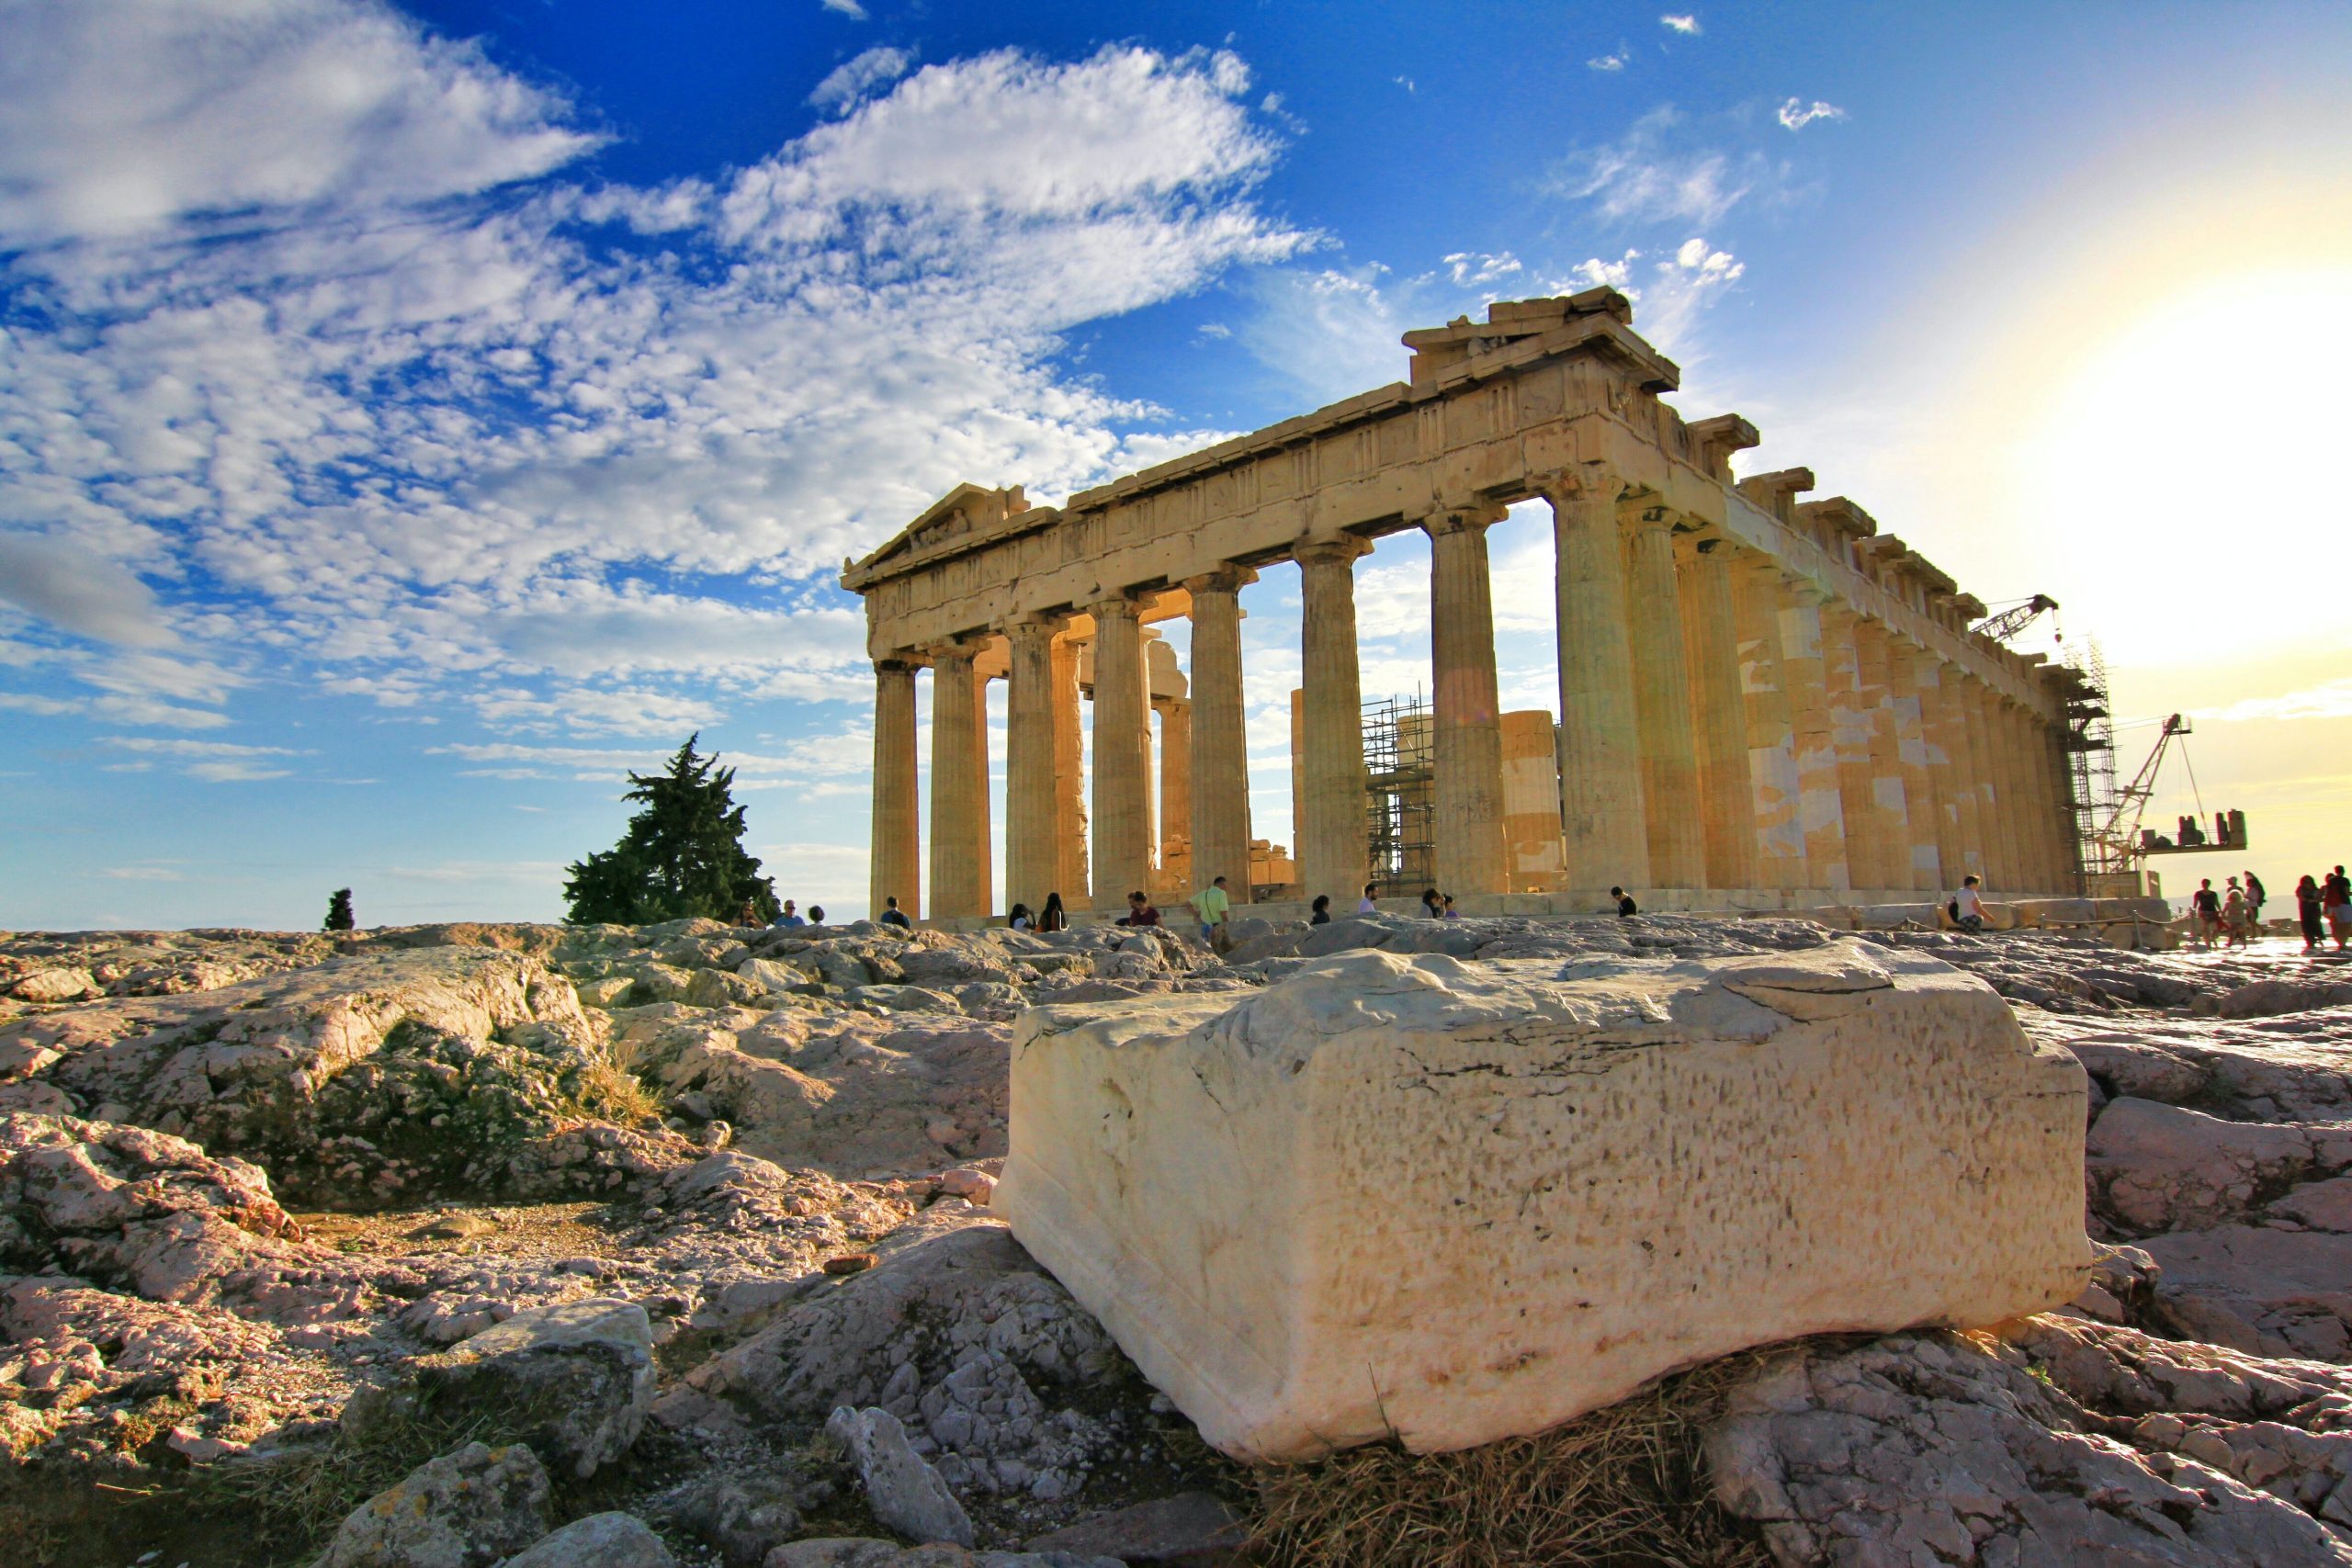 Play'n Go and Bet365 Receive Gambling License In Greece